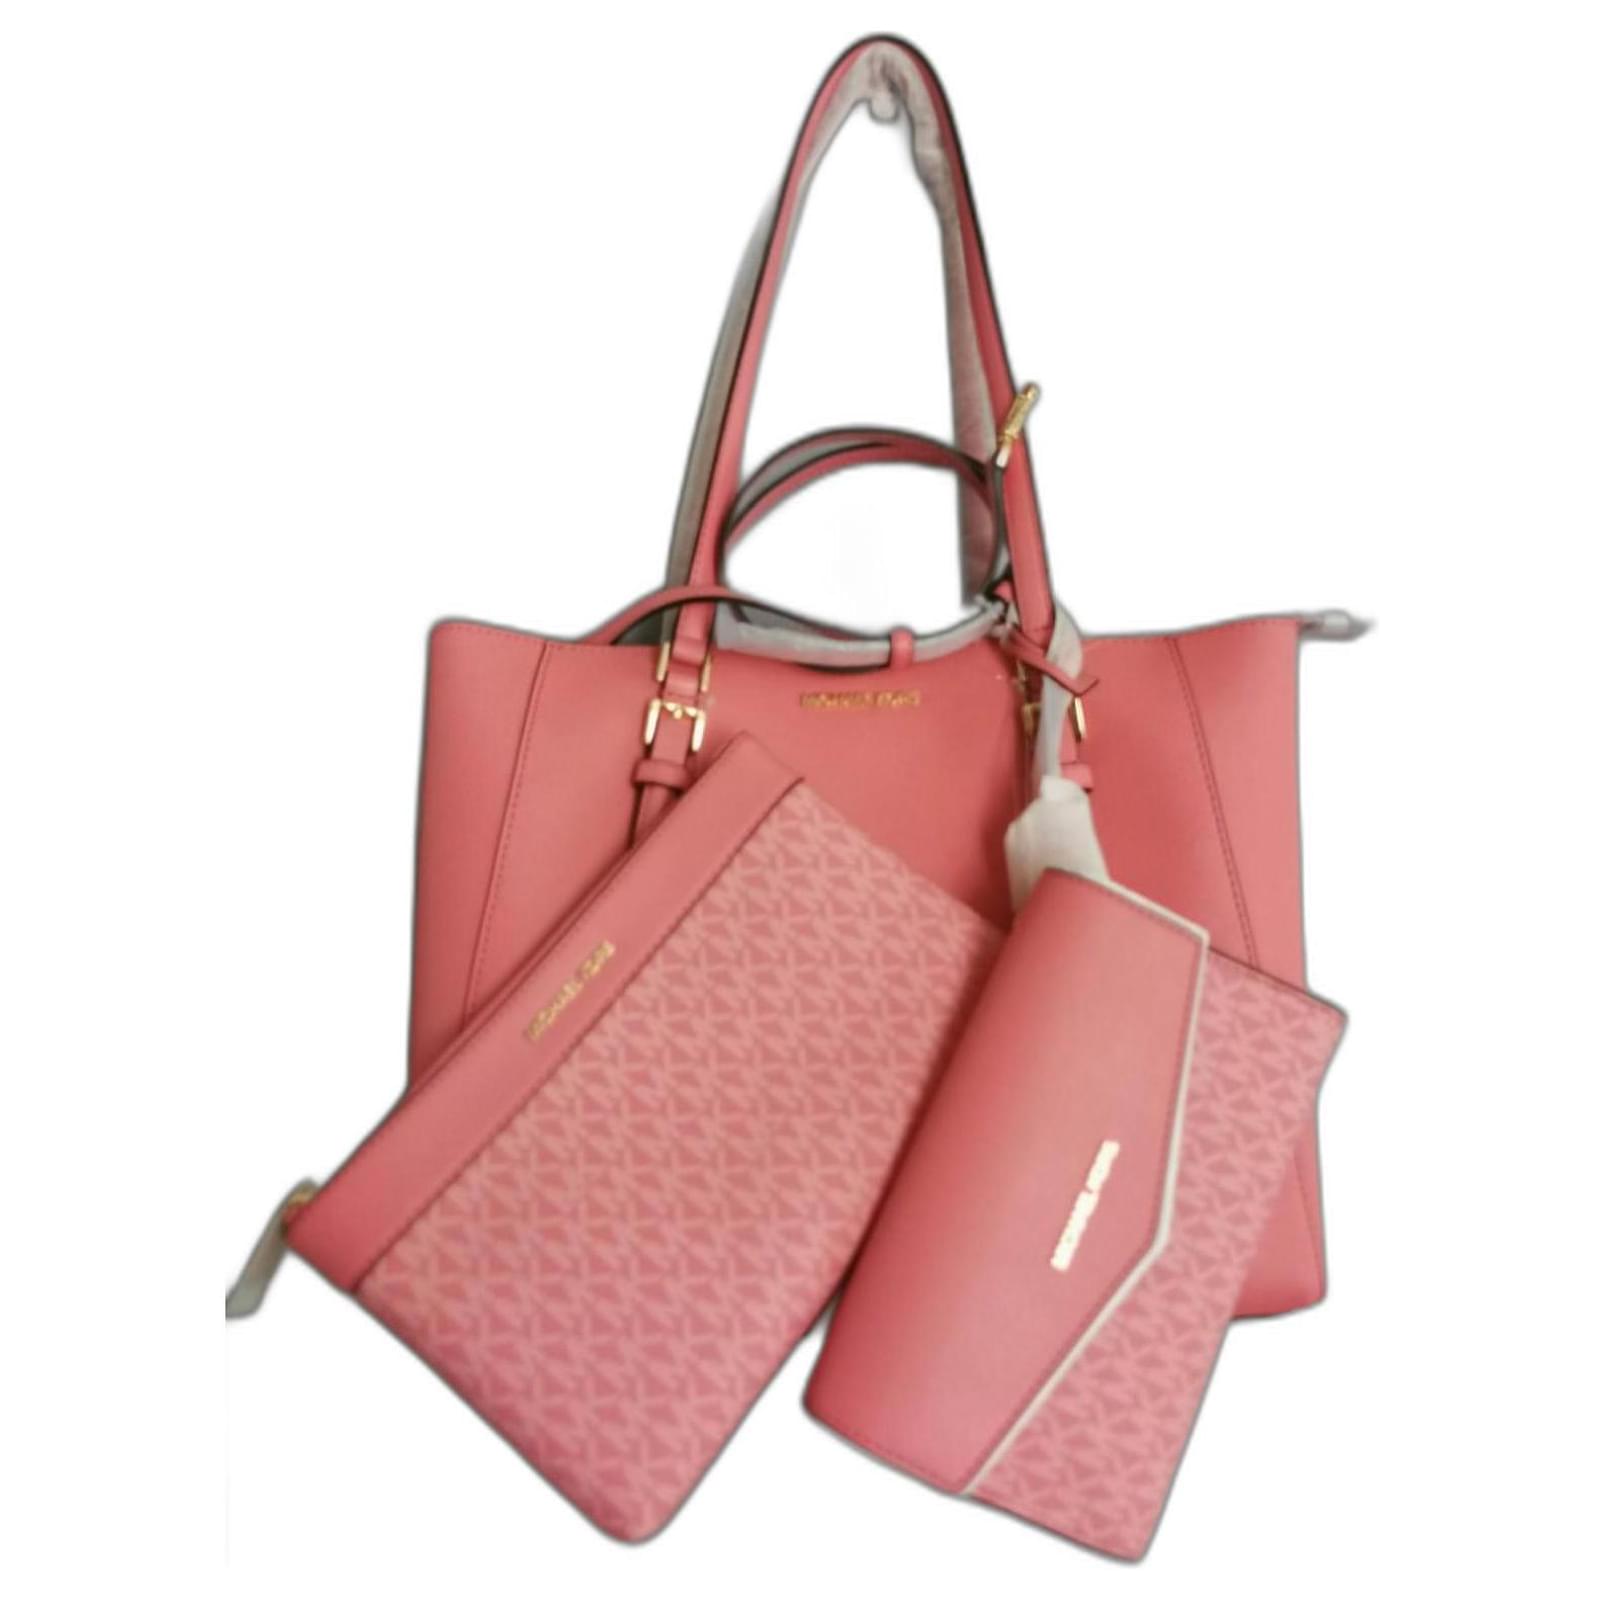 MK 3 in 1 Leather Tote Bag Set